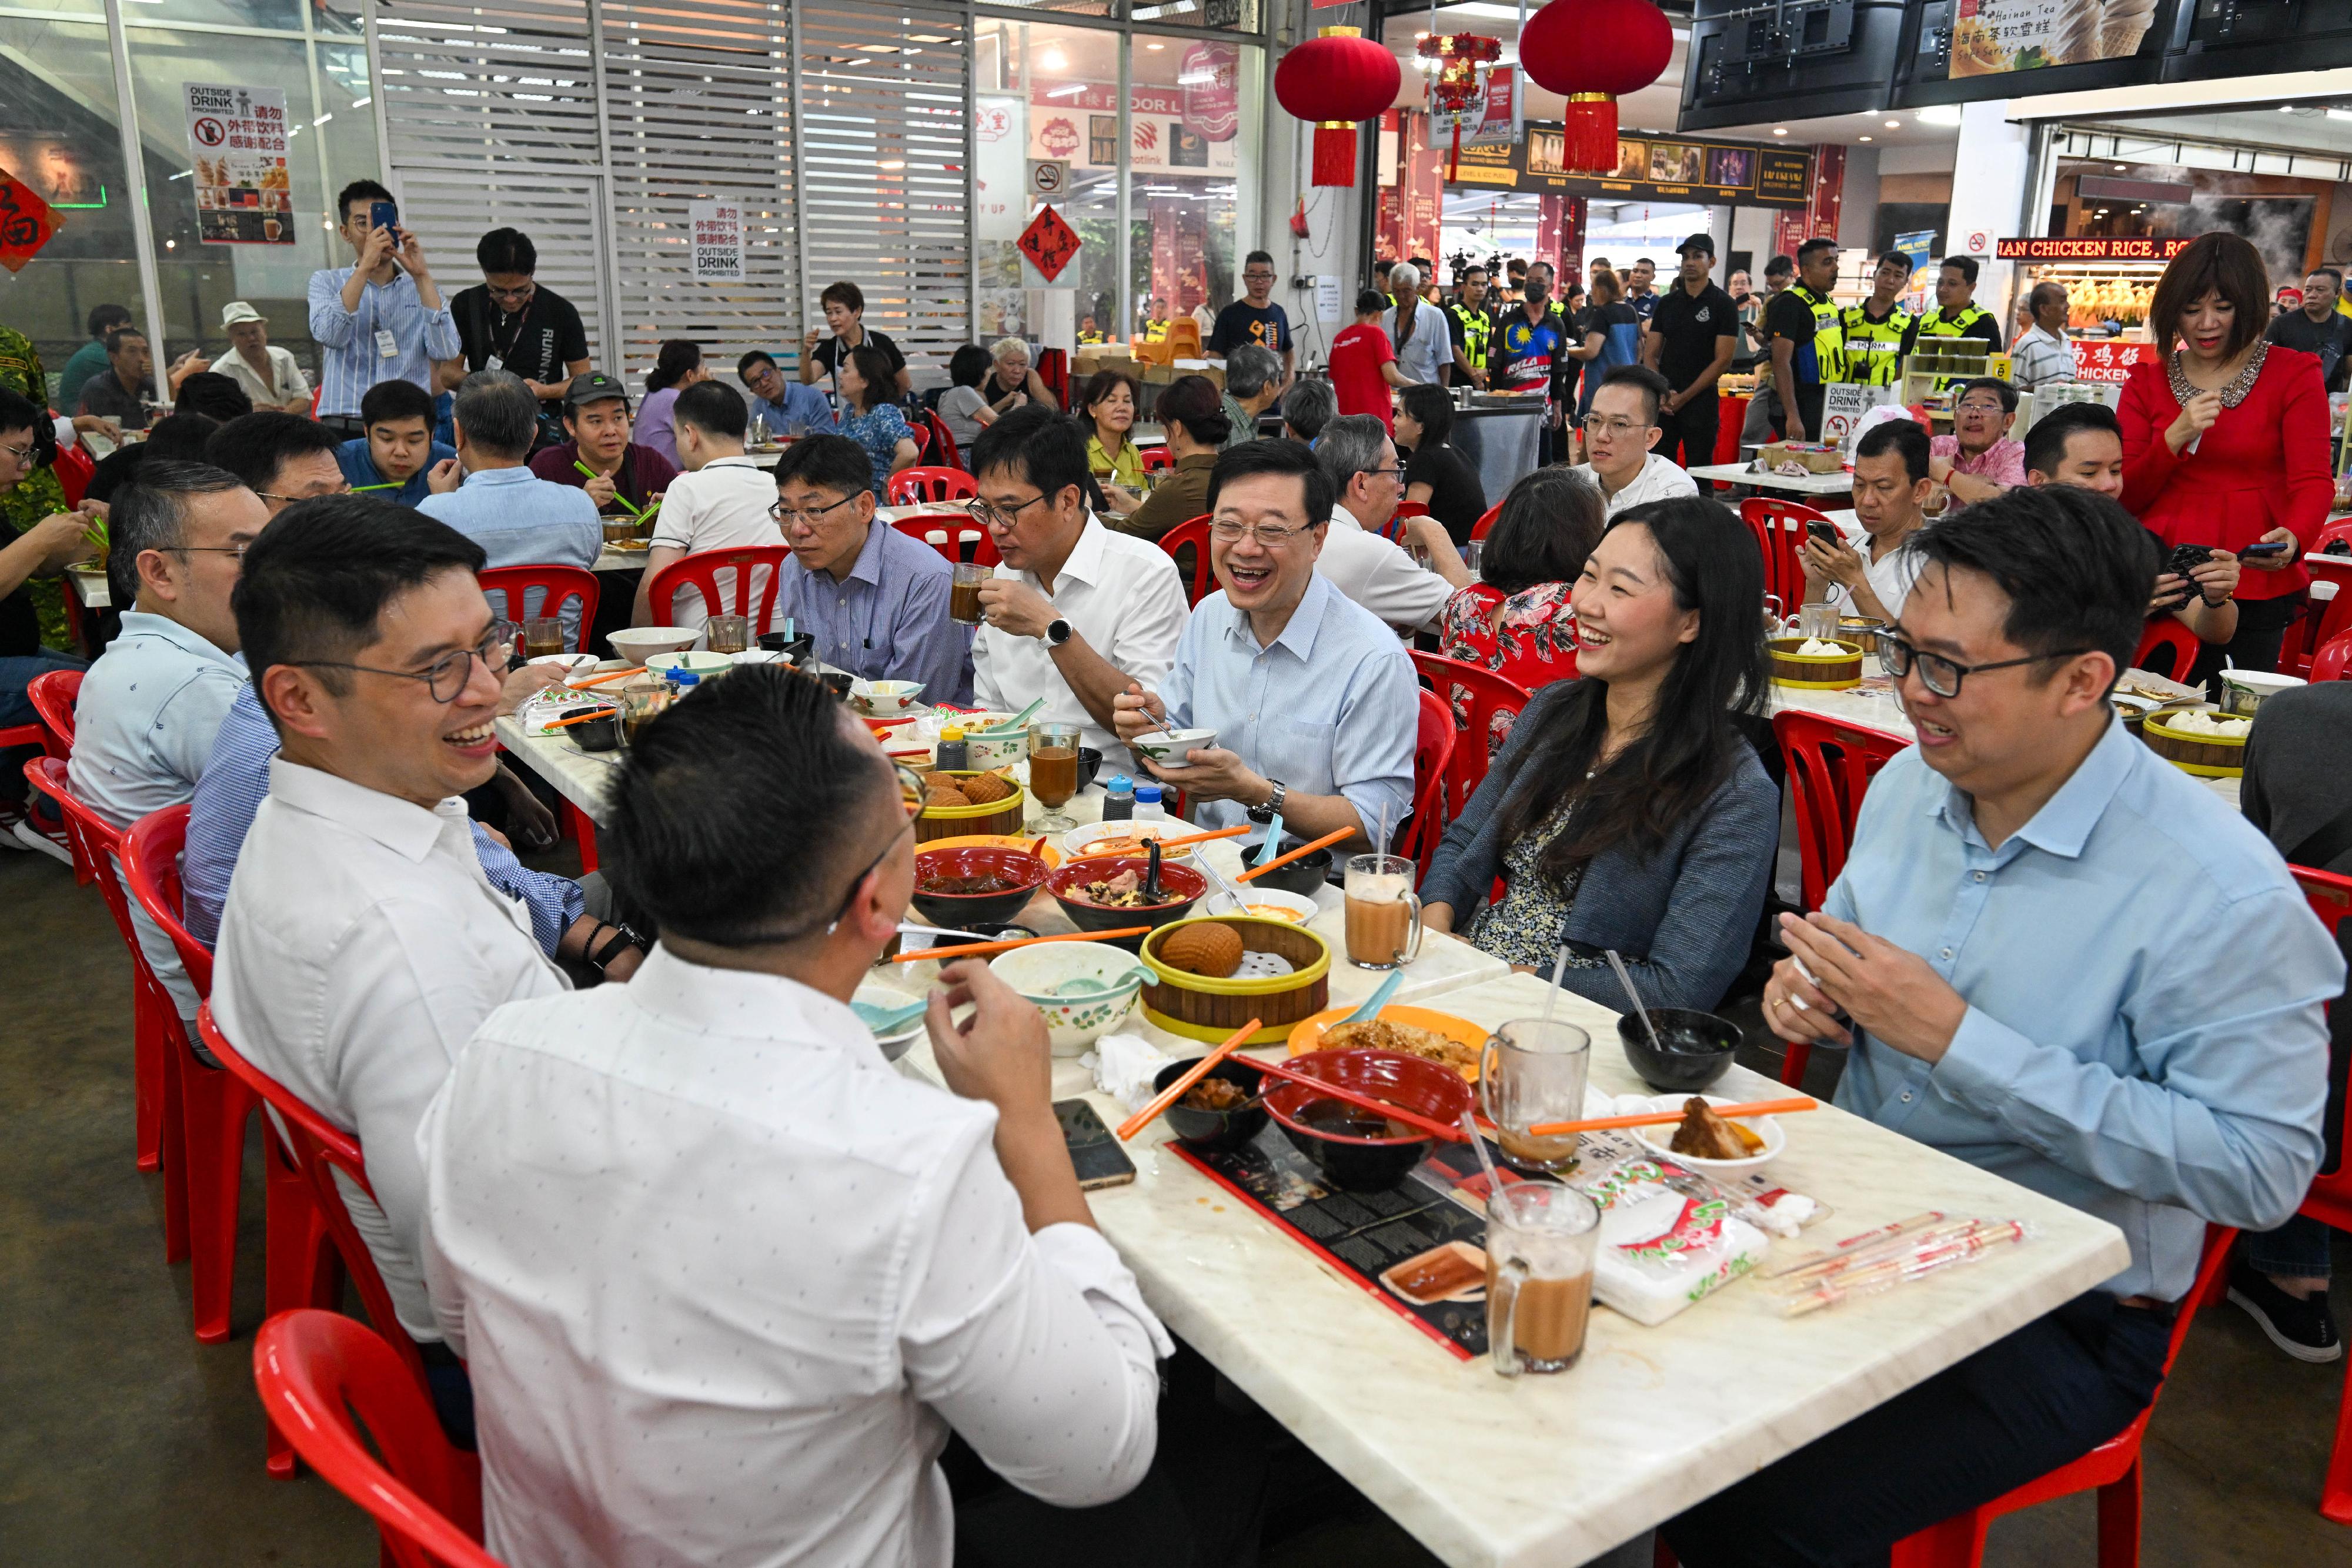 The Chief Executive, Mr John Lee (third right), enjoys a local breakfast at a hawker centre in Kuala Lumpur, Malaysia today (July 28).